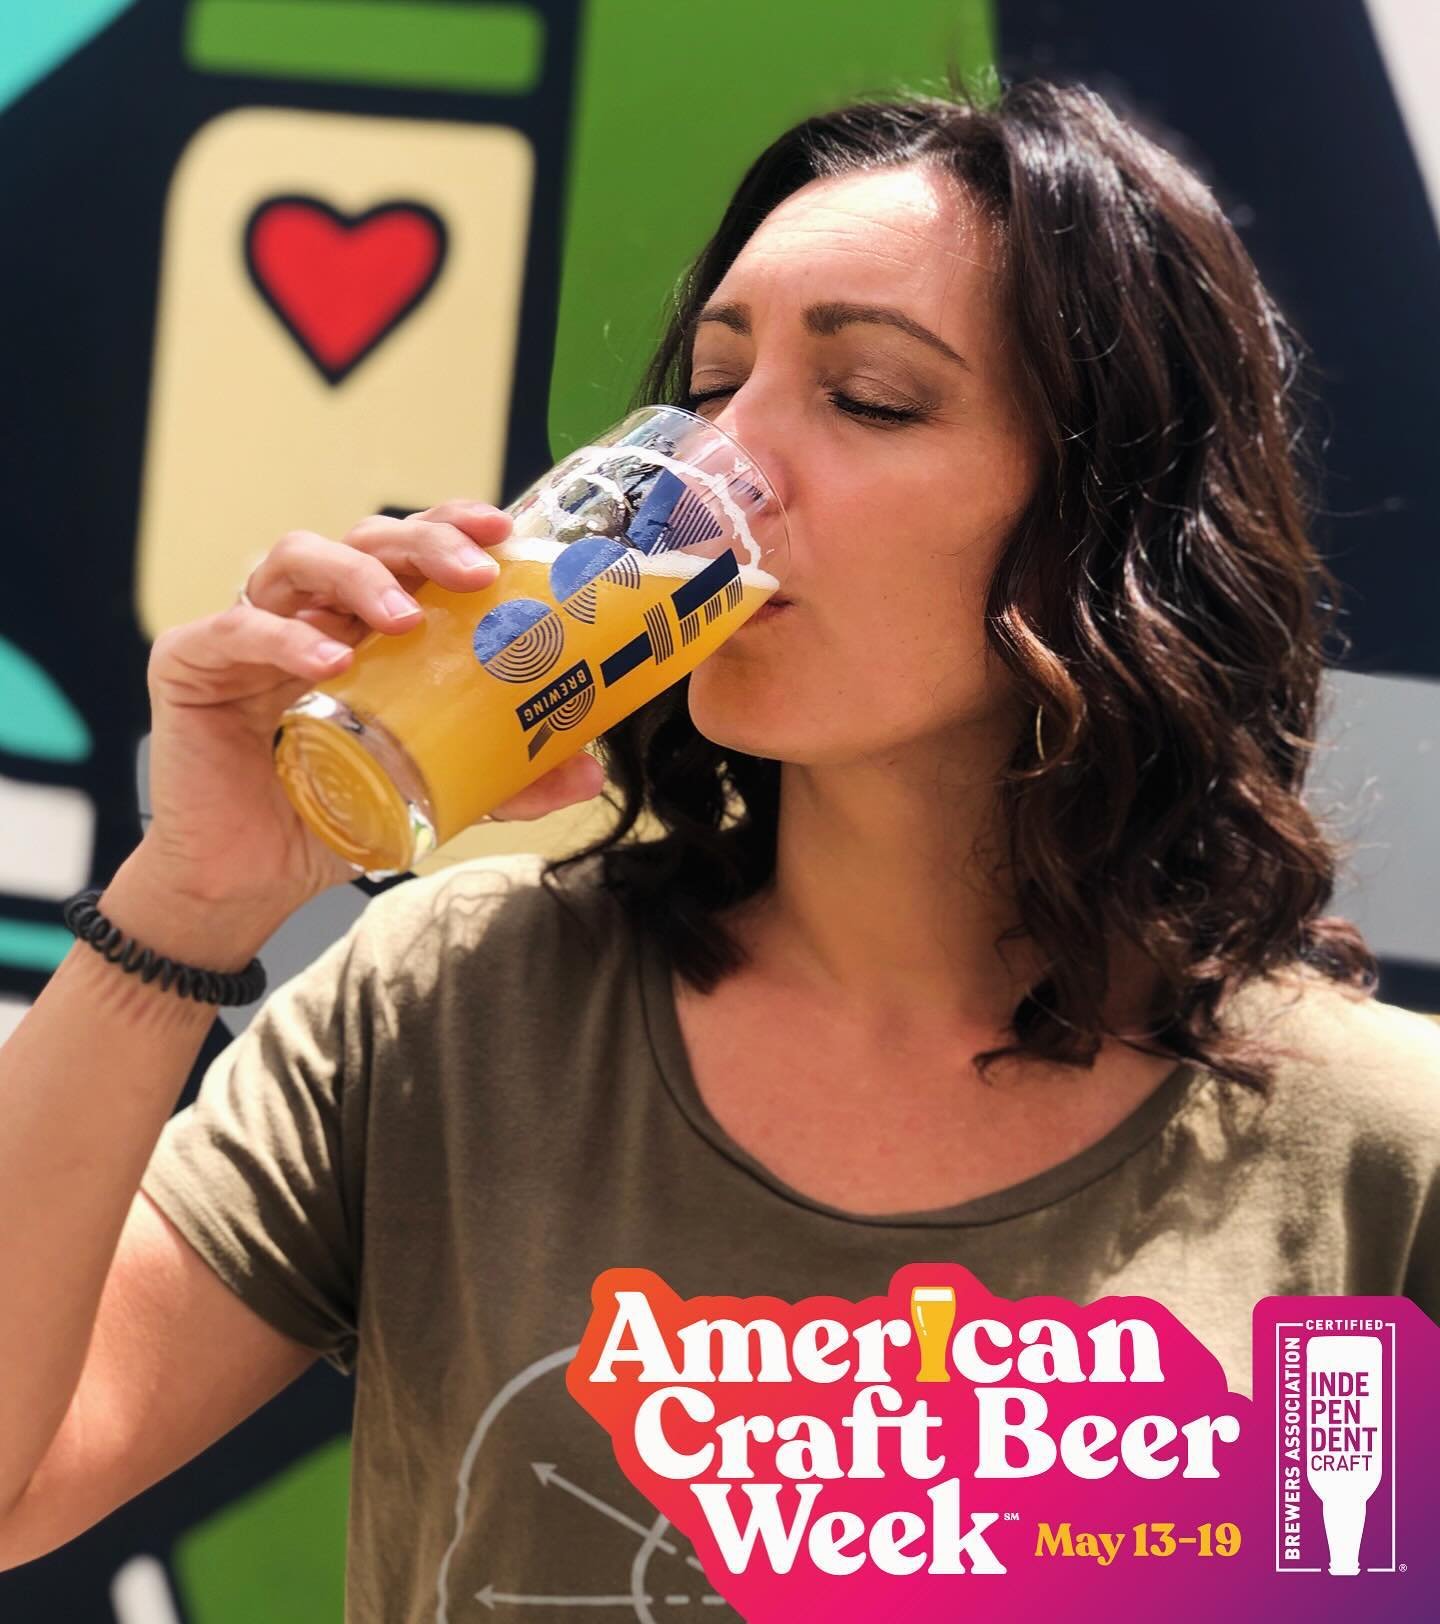 It&rsquo;s #AmericanCraftBeerWeek! Did you know that was still a thing? Because we HOPE you treat every week like it&rsquo;s American Craft Beer Week.❤️

Be sure to go out and support your local, small breweries and brewpubs this week and show them s